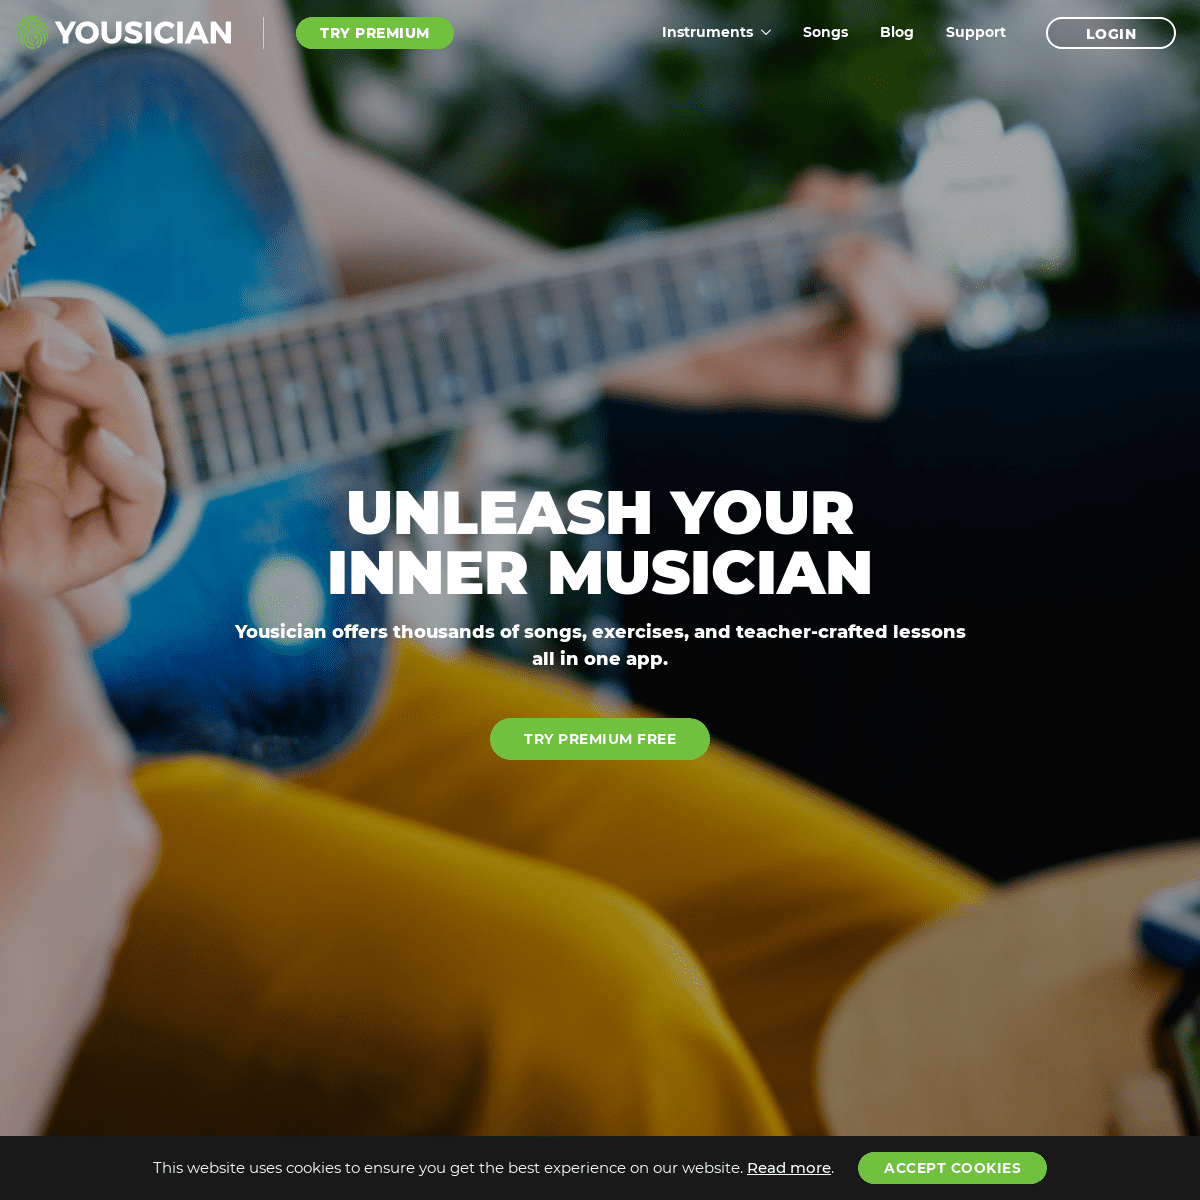 A complete backup of yousician.com